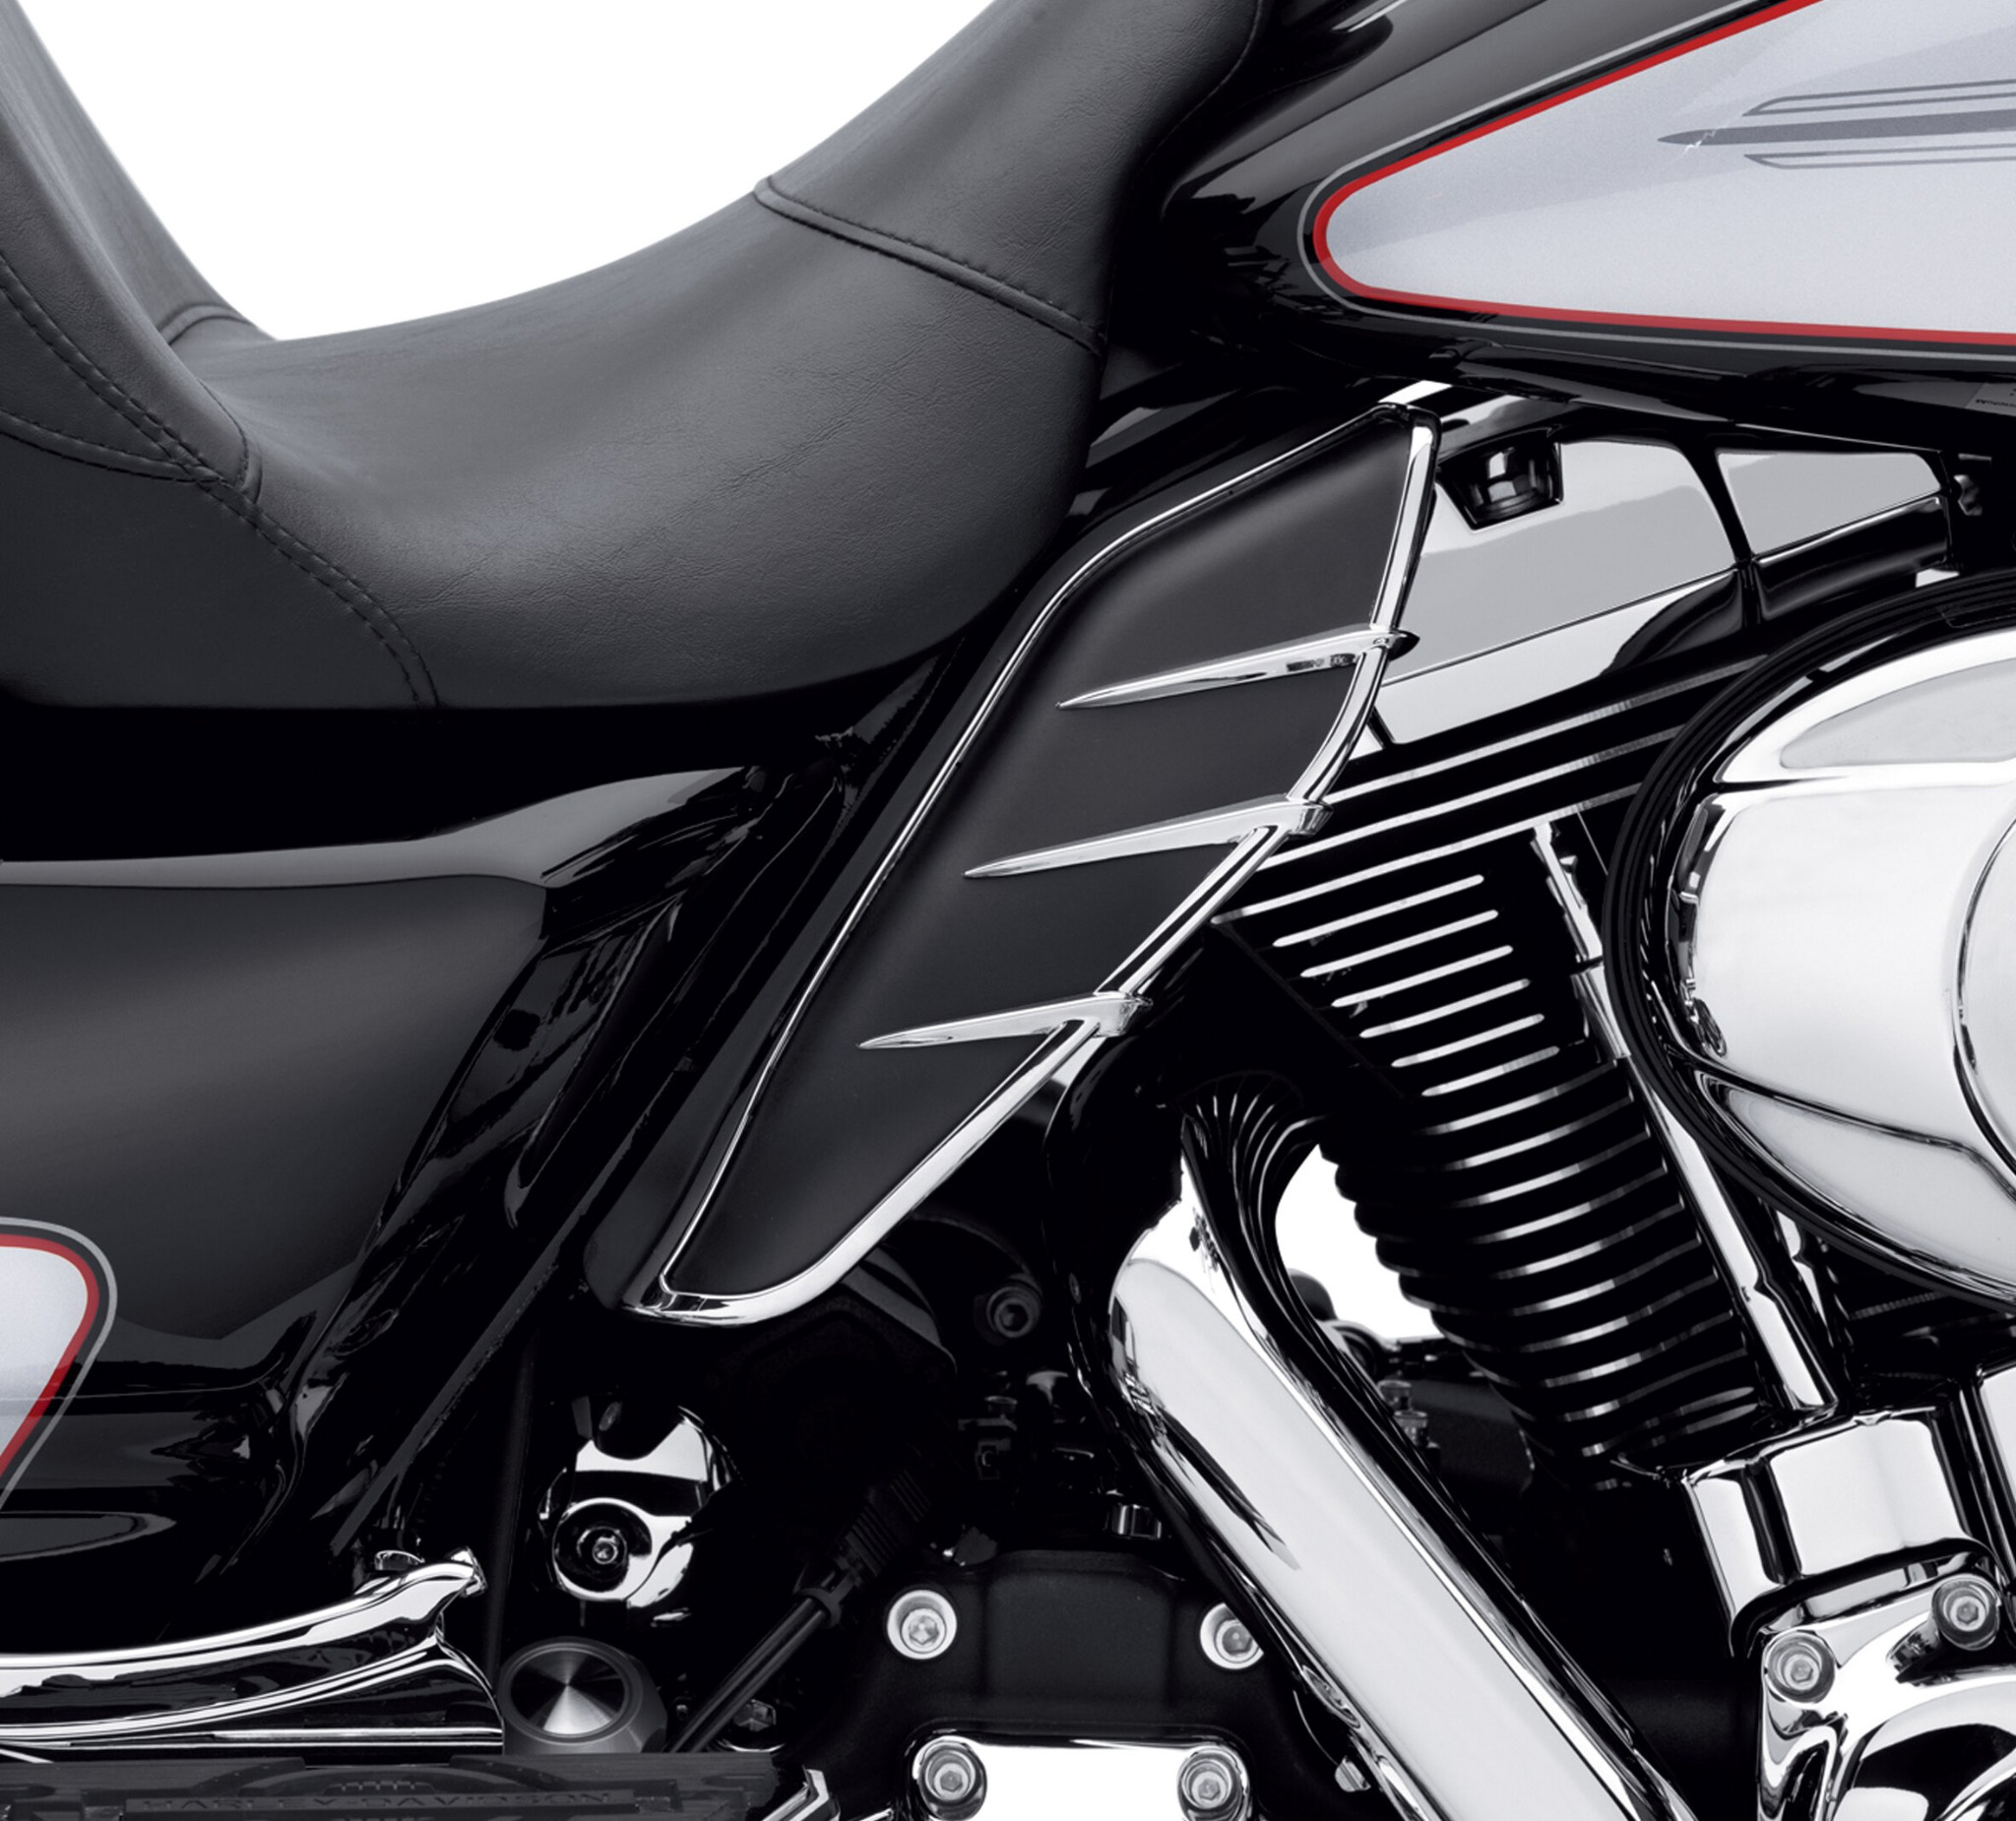 Flame Mid-Frame Engine Air Deflectors Heat Shield Trim For Harley Touring 09-up